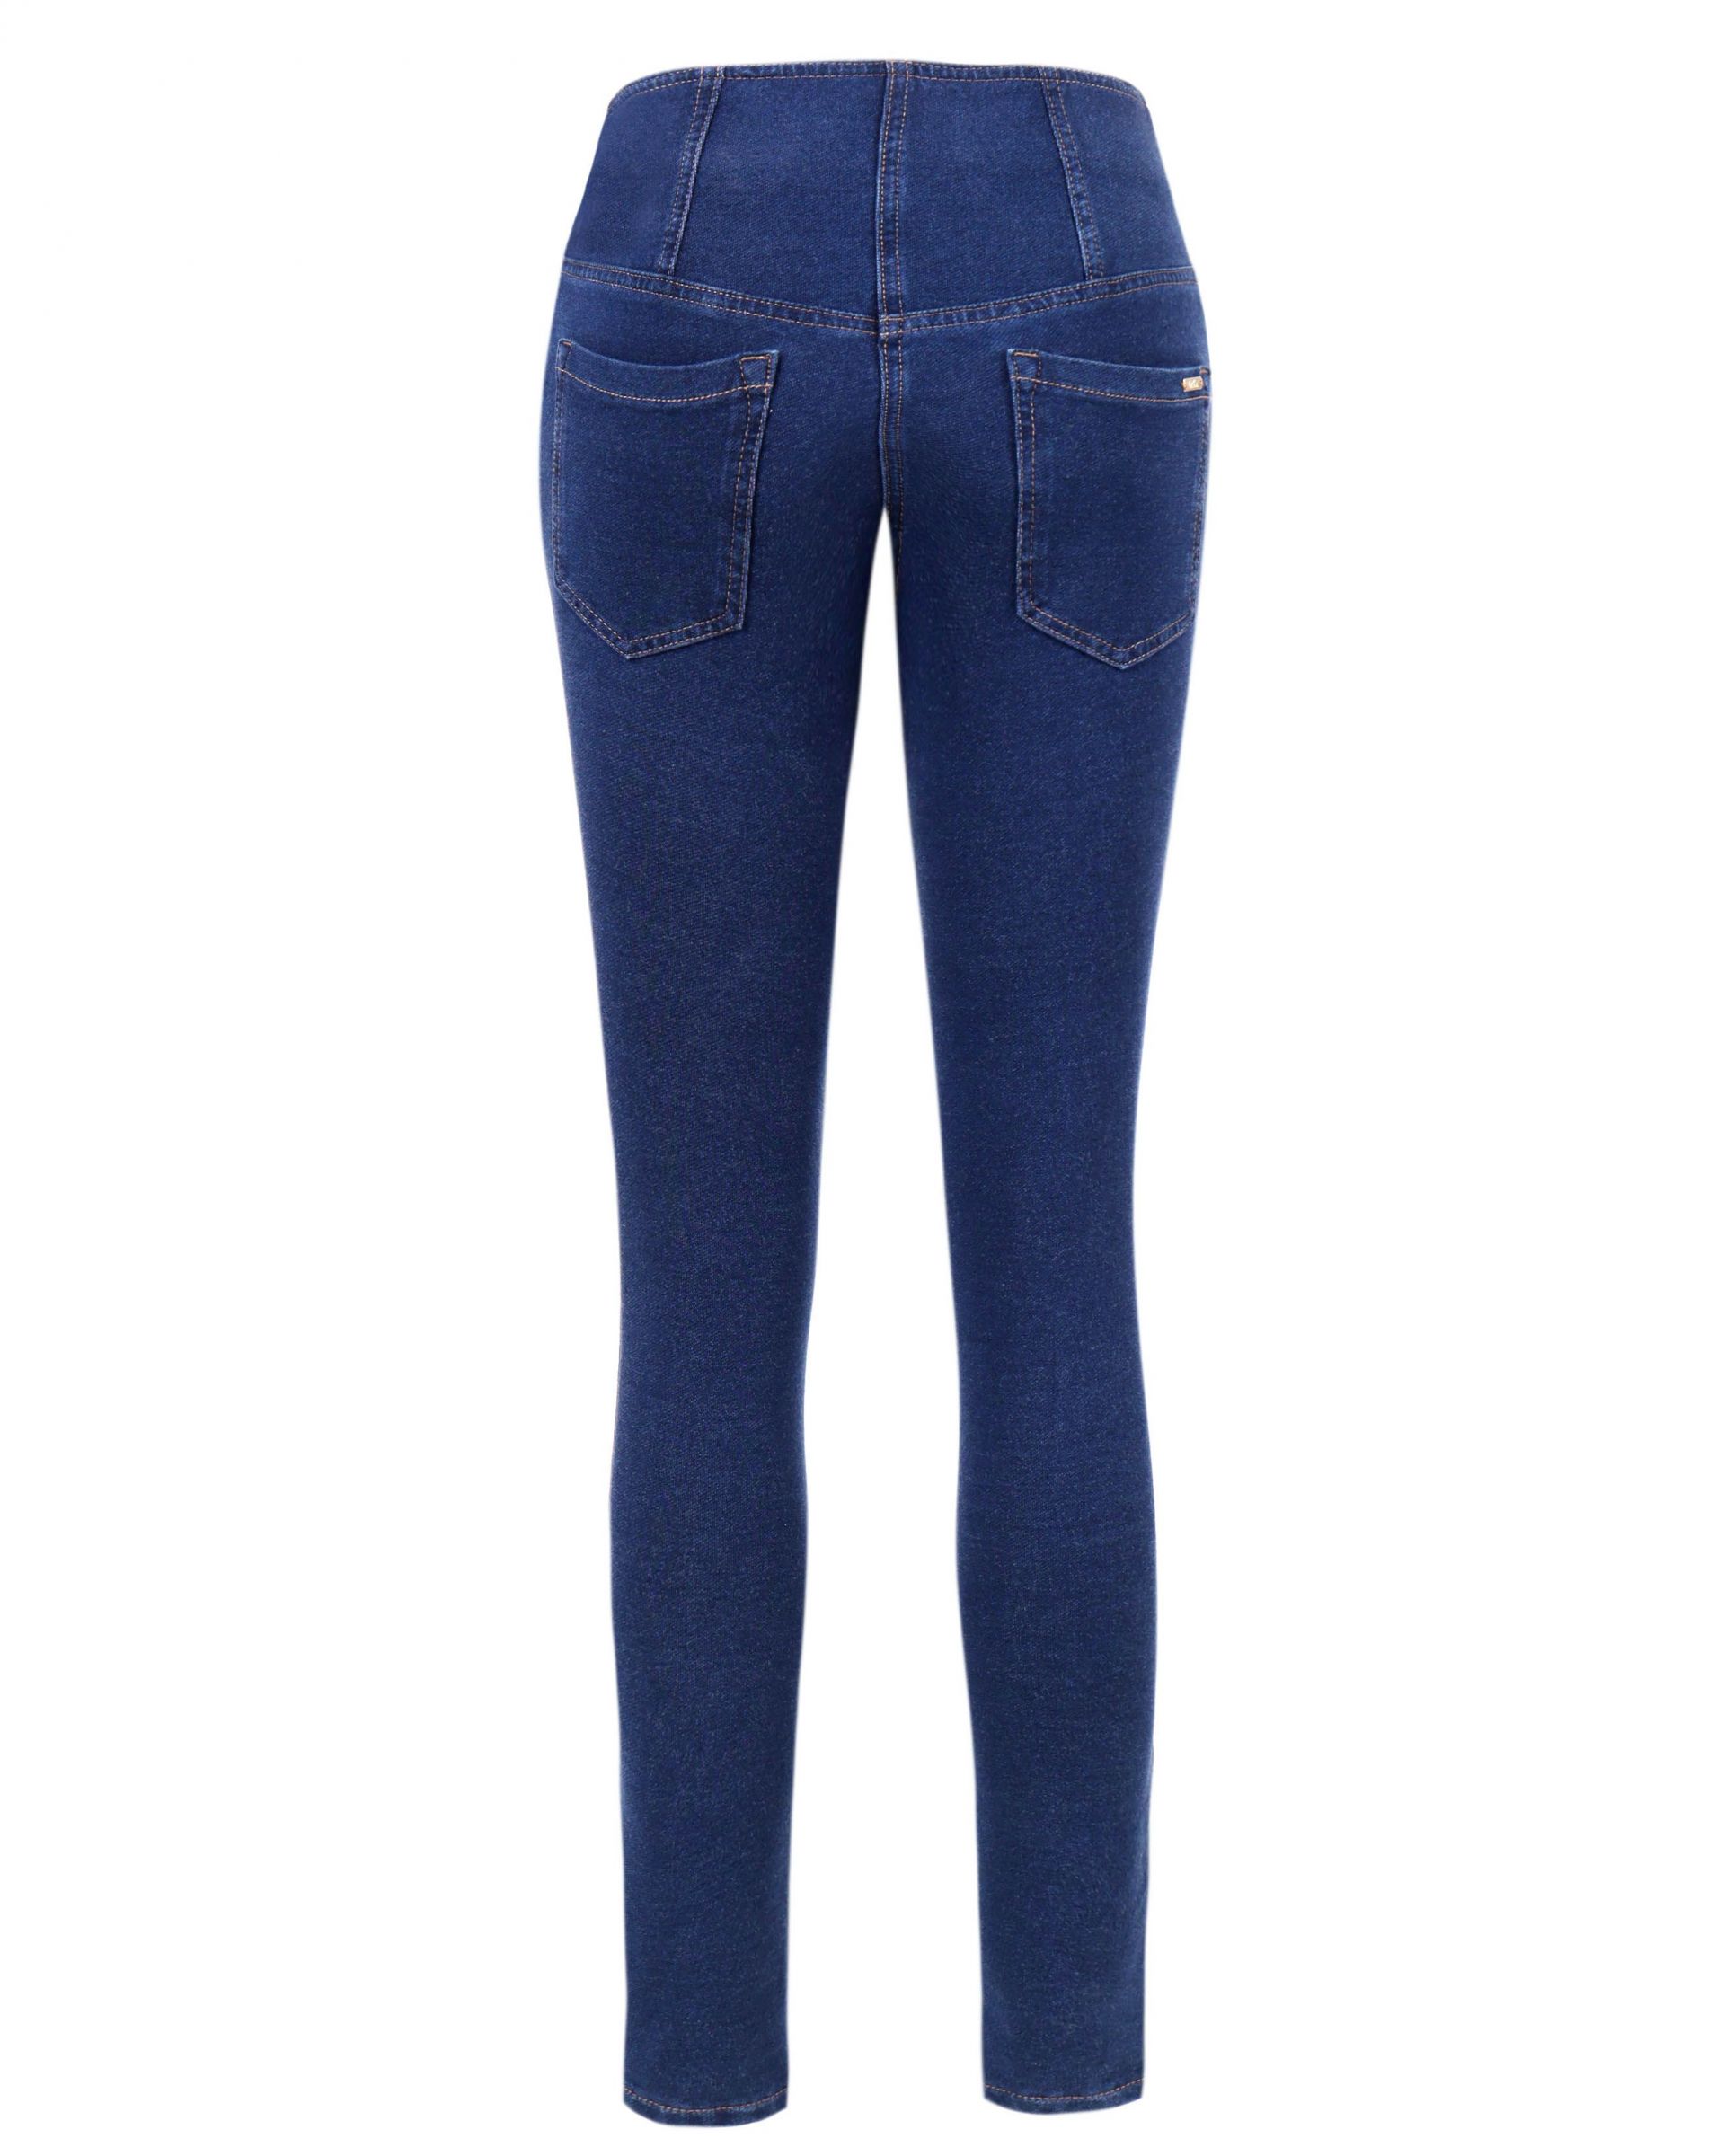 Cotton jeans with a front seam 1